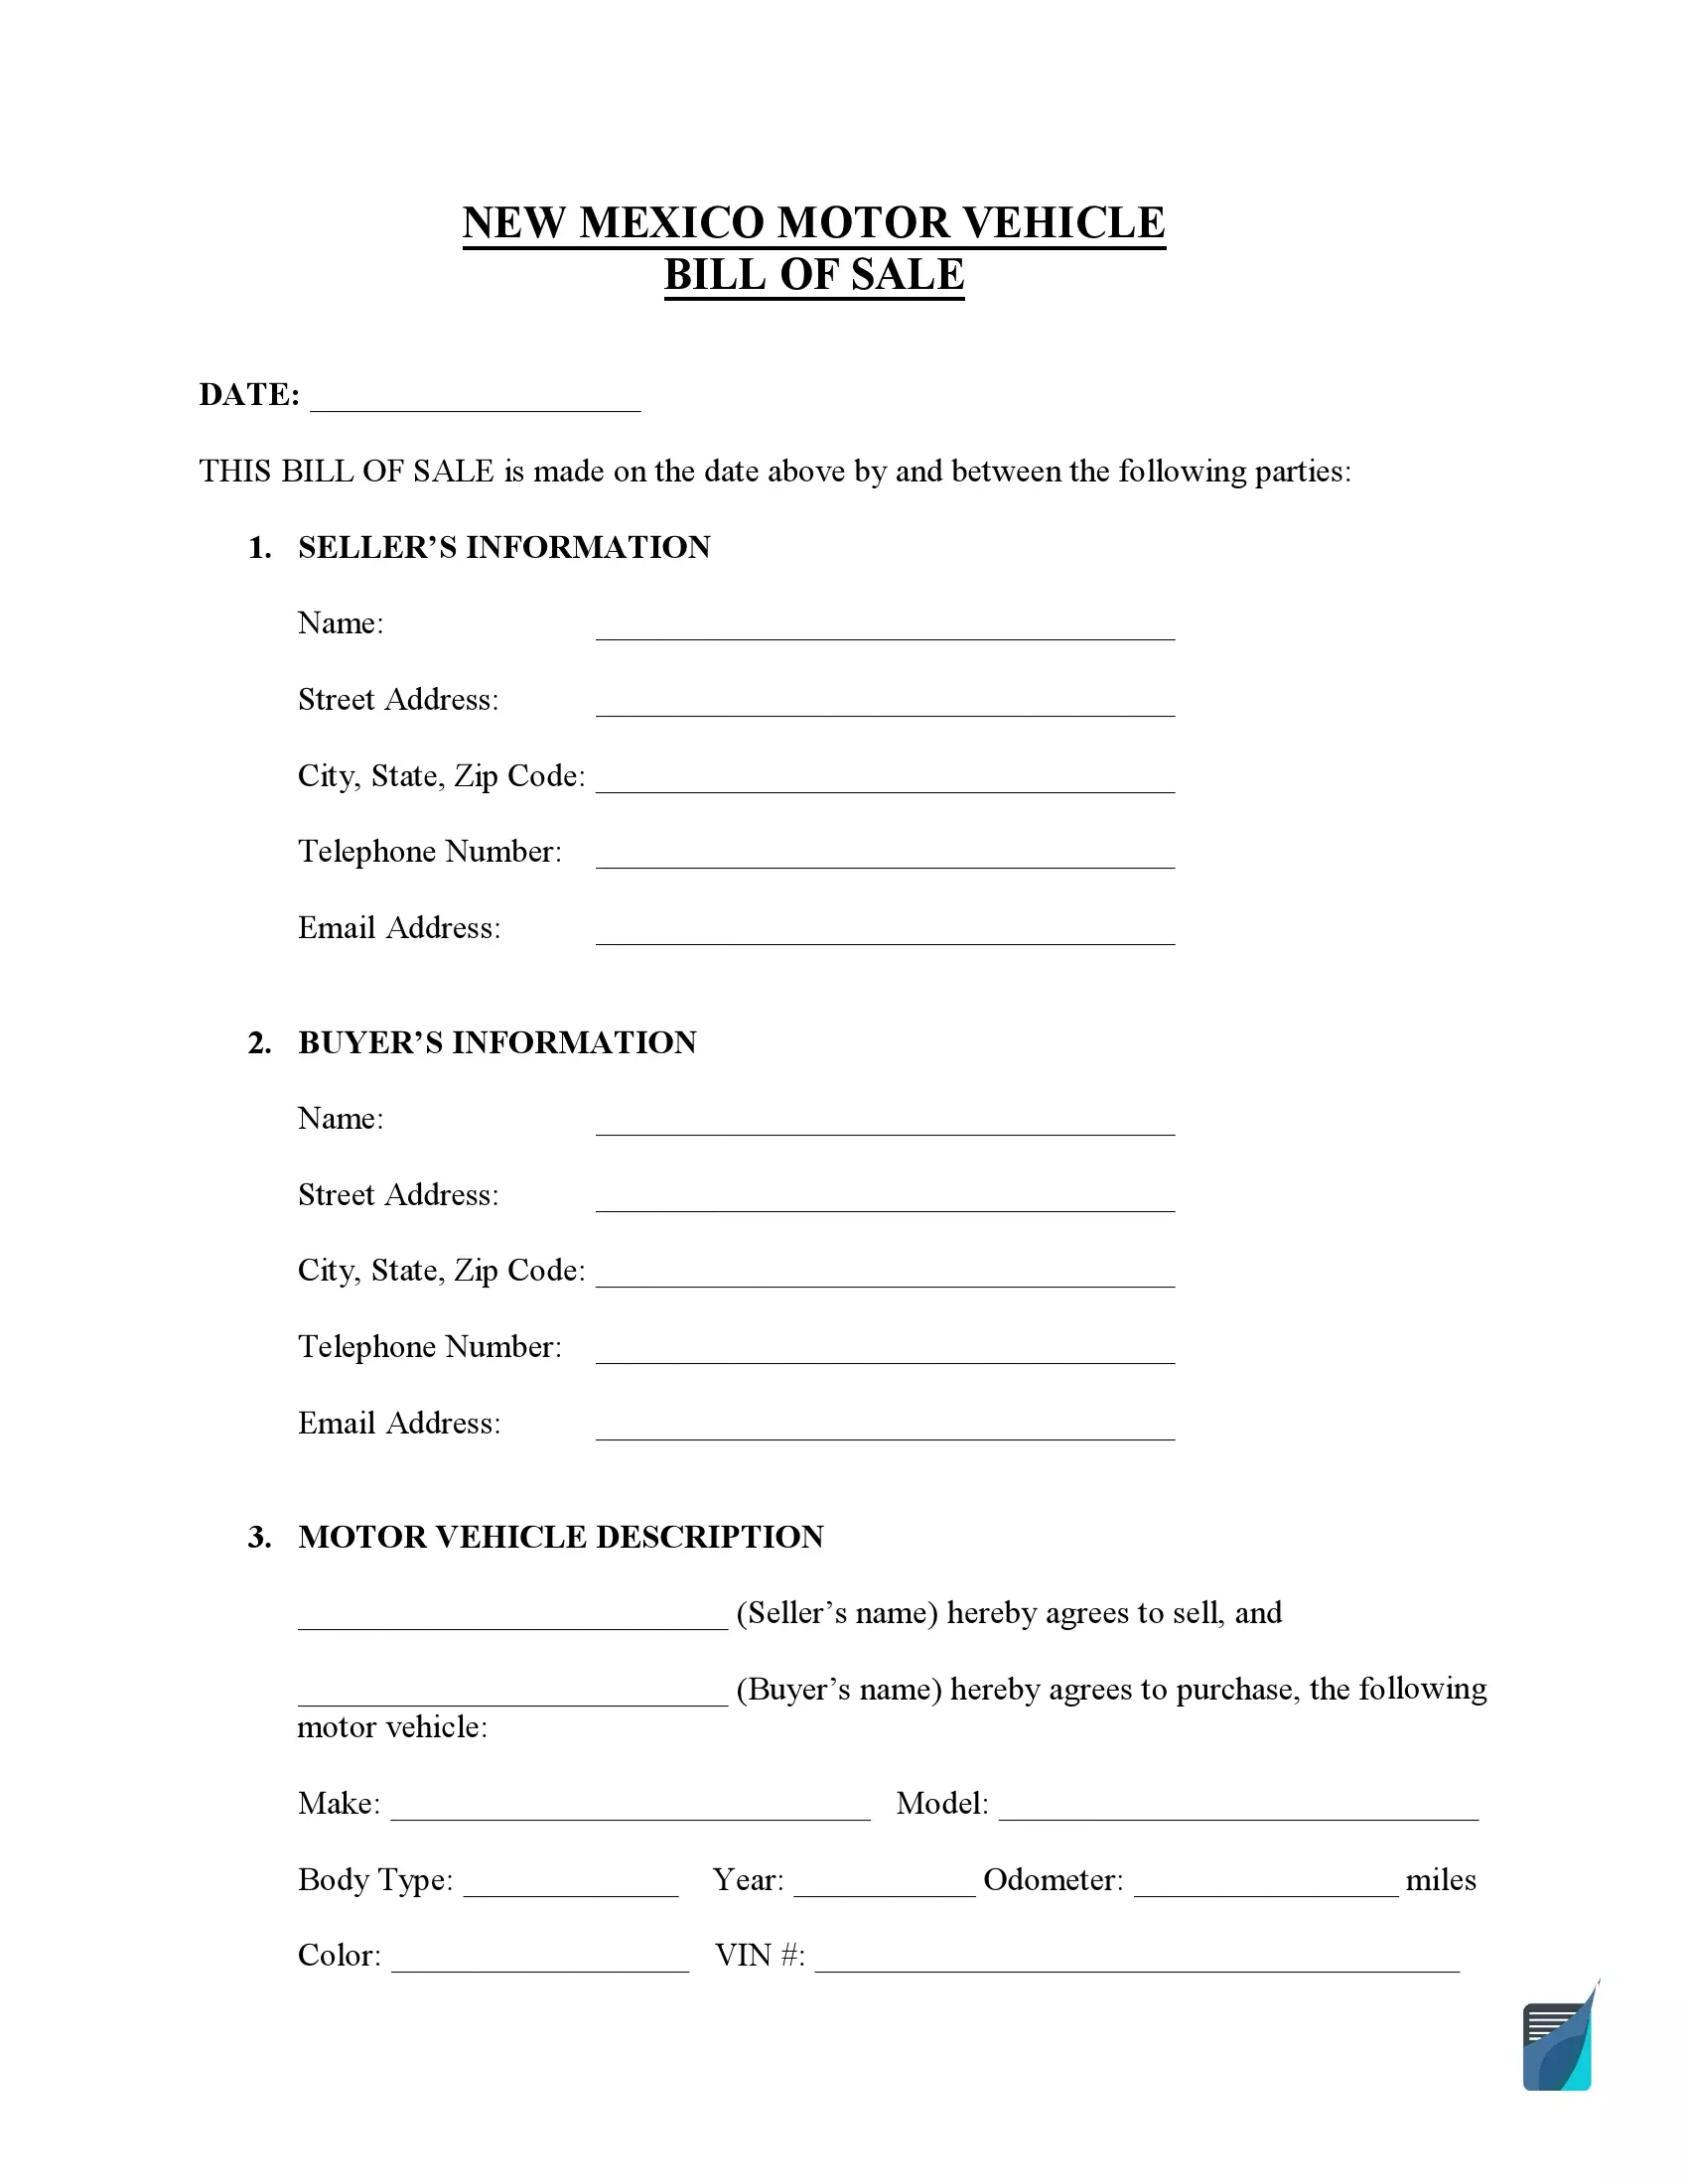 New-Mexico-motor-vehicle-bill-of-sale-template